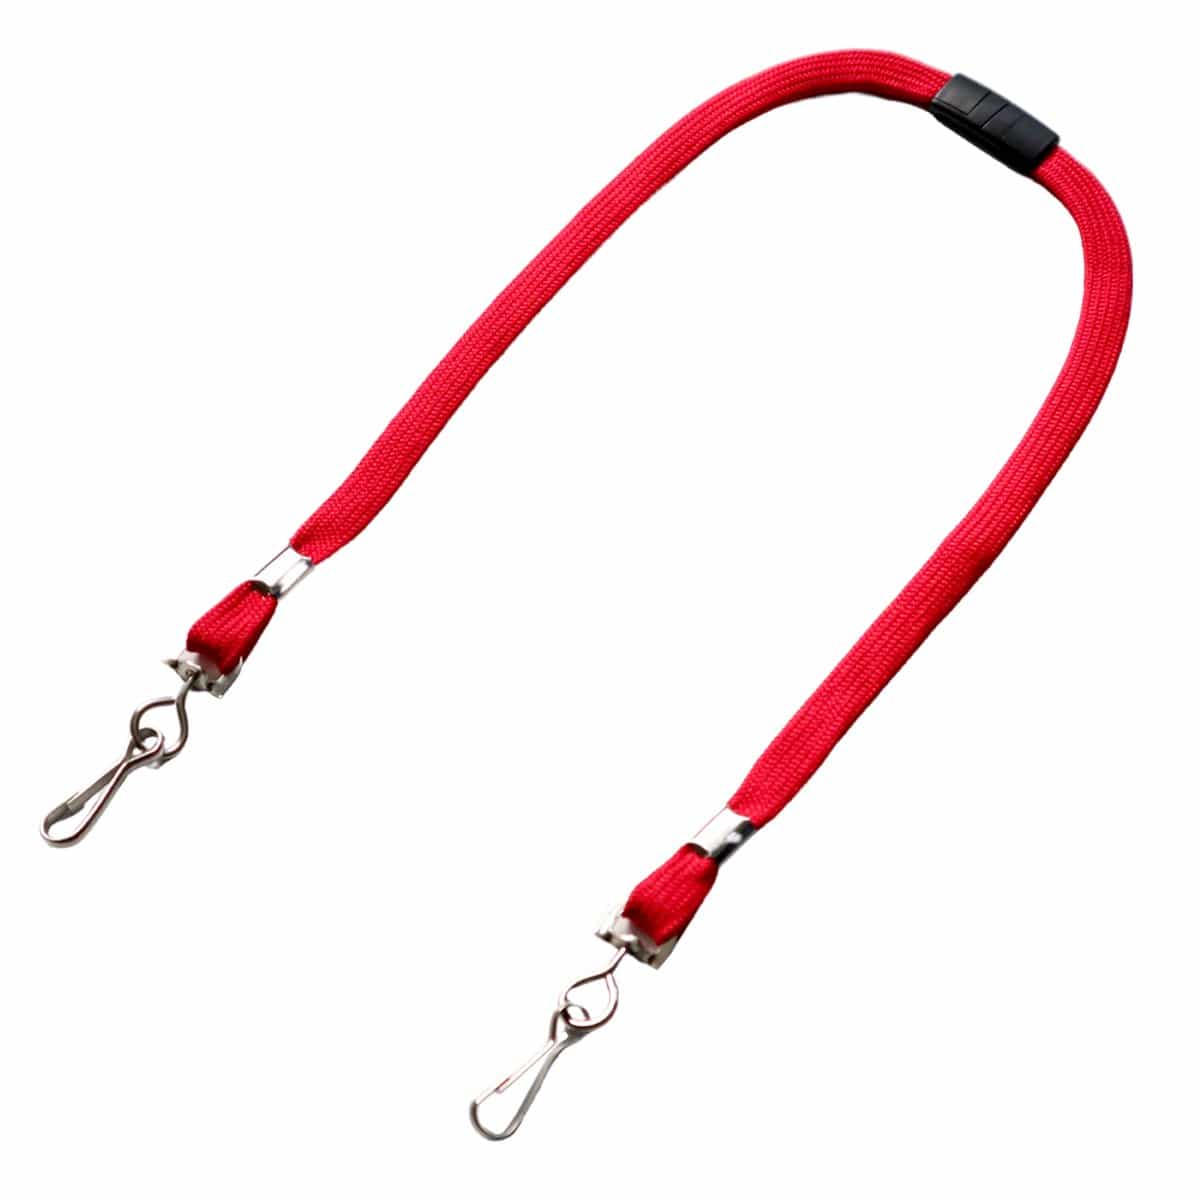 Red Kids Face Mask Lanyard / Hanger with Safety Breakaway Clasp - Short Length for Childrens Facemasks SPID-2330-RED